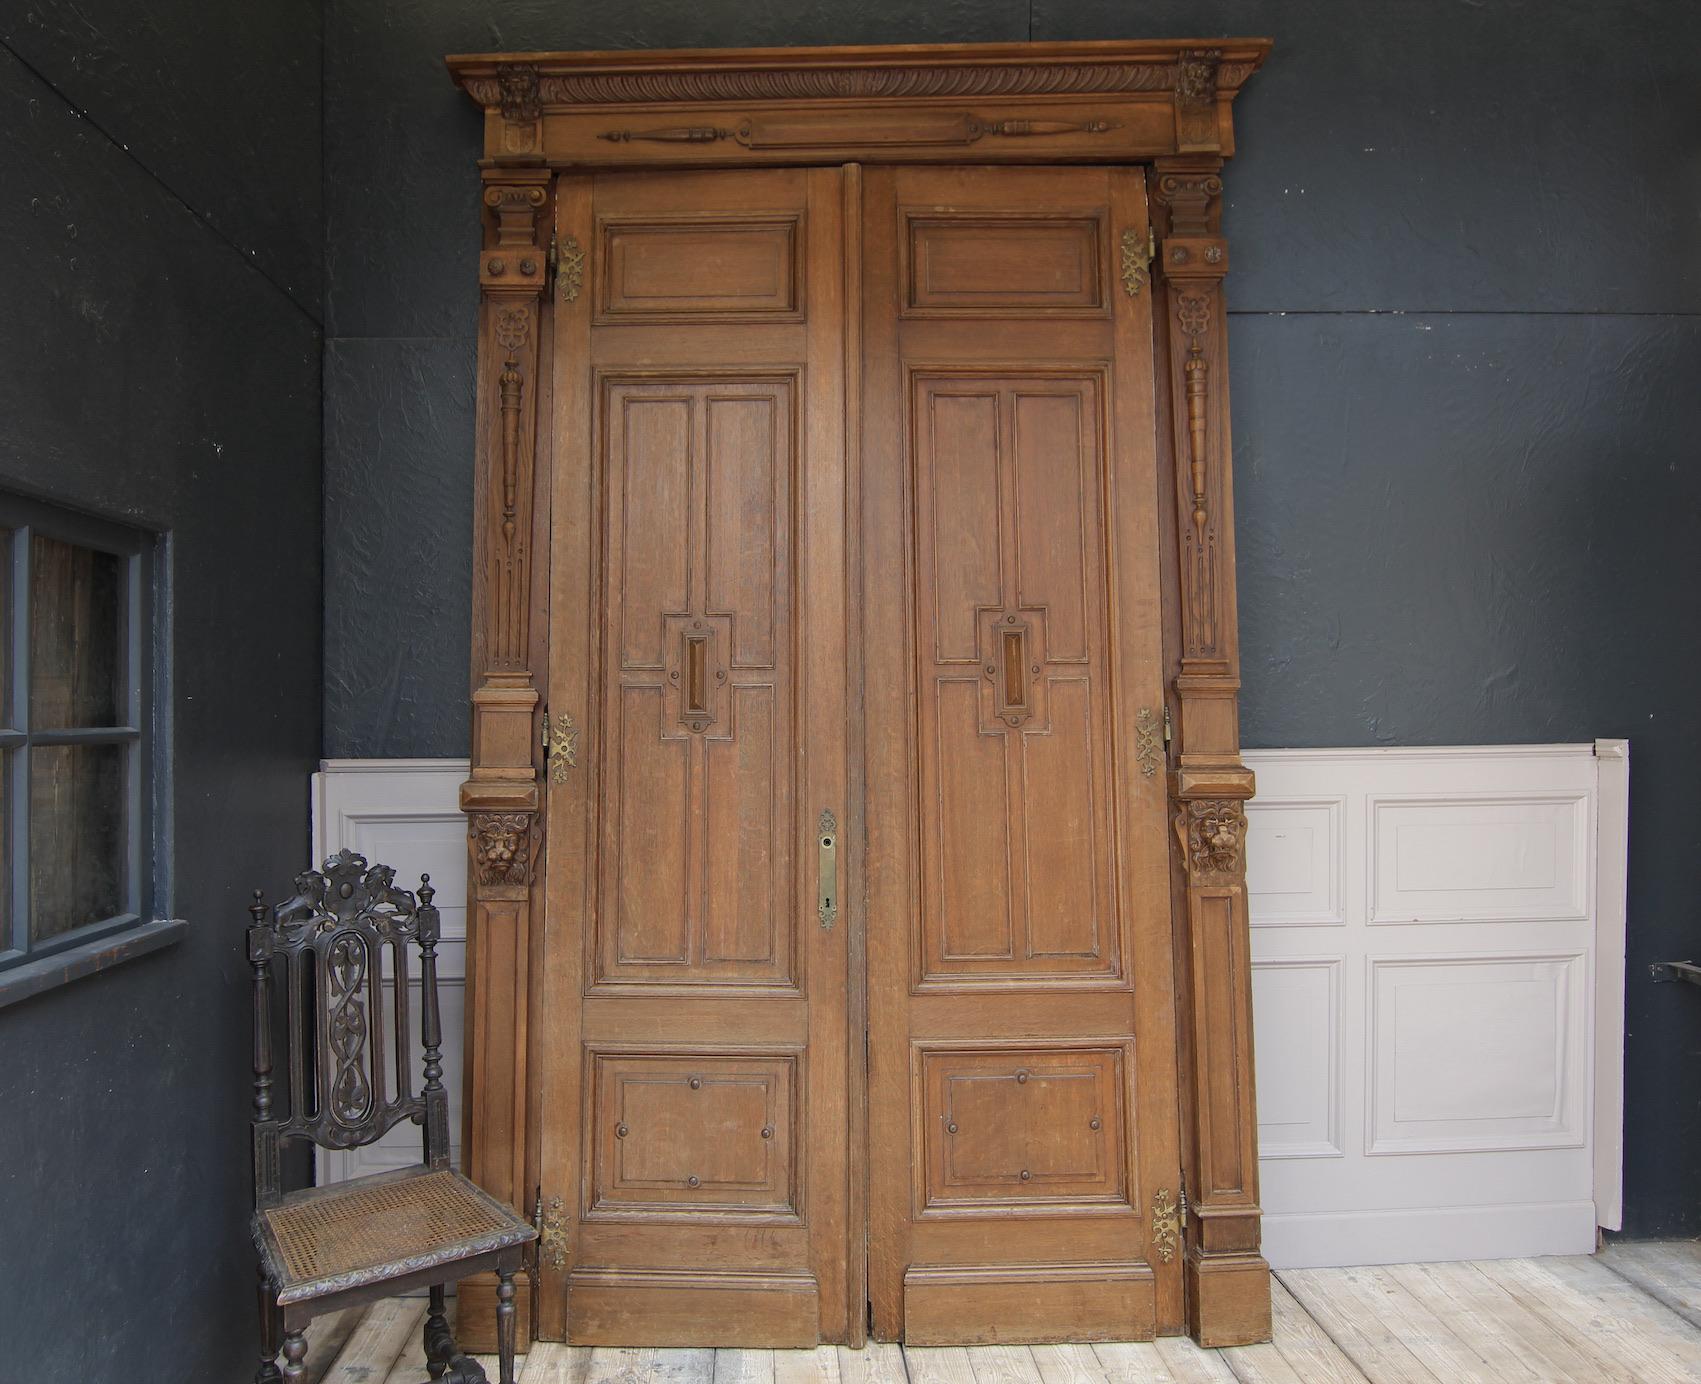 Large Belgian double door with frame from the 19th century. 

The front side shows the oak which it is made of, the back of the door is in beautiful original paint.

The doors each have 3 cassettes. There is the original frame included for the